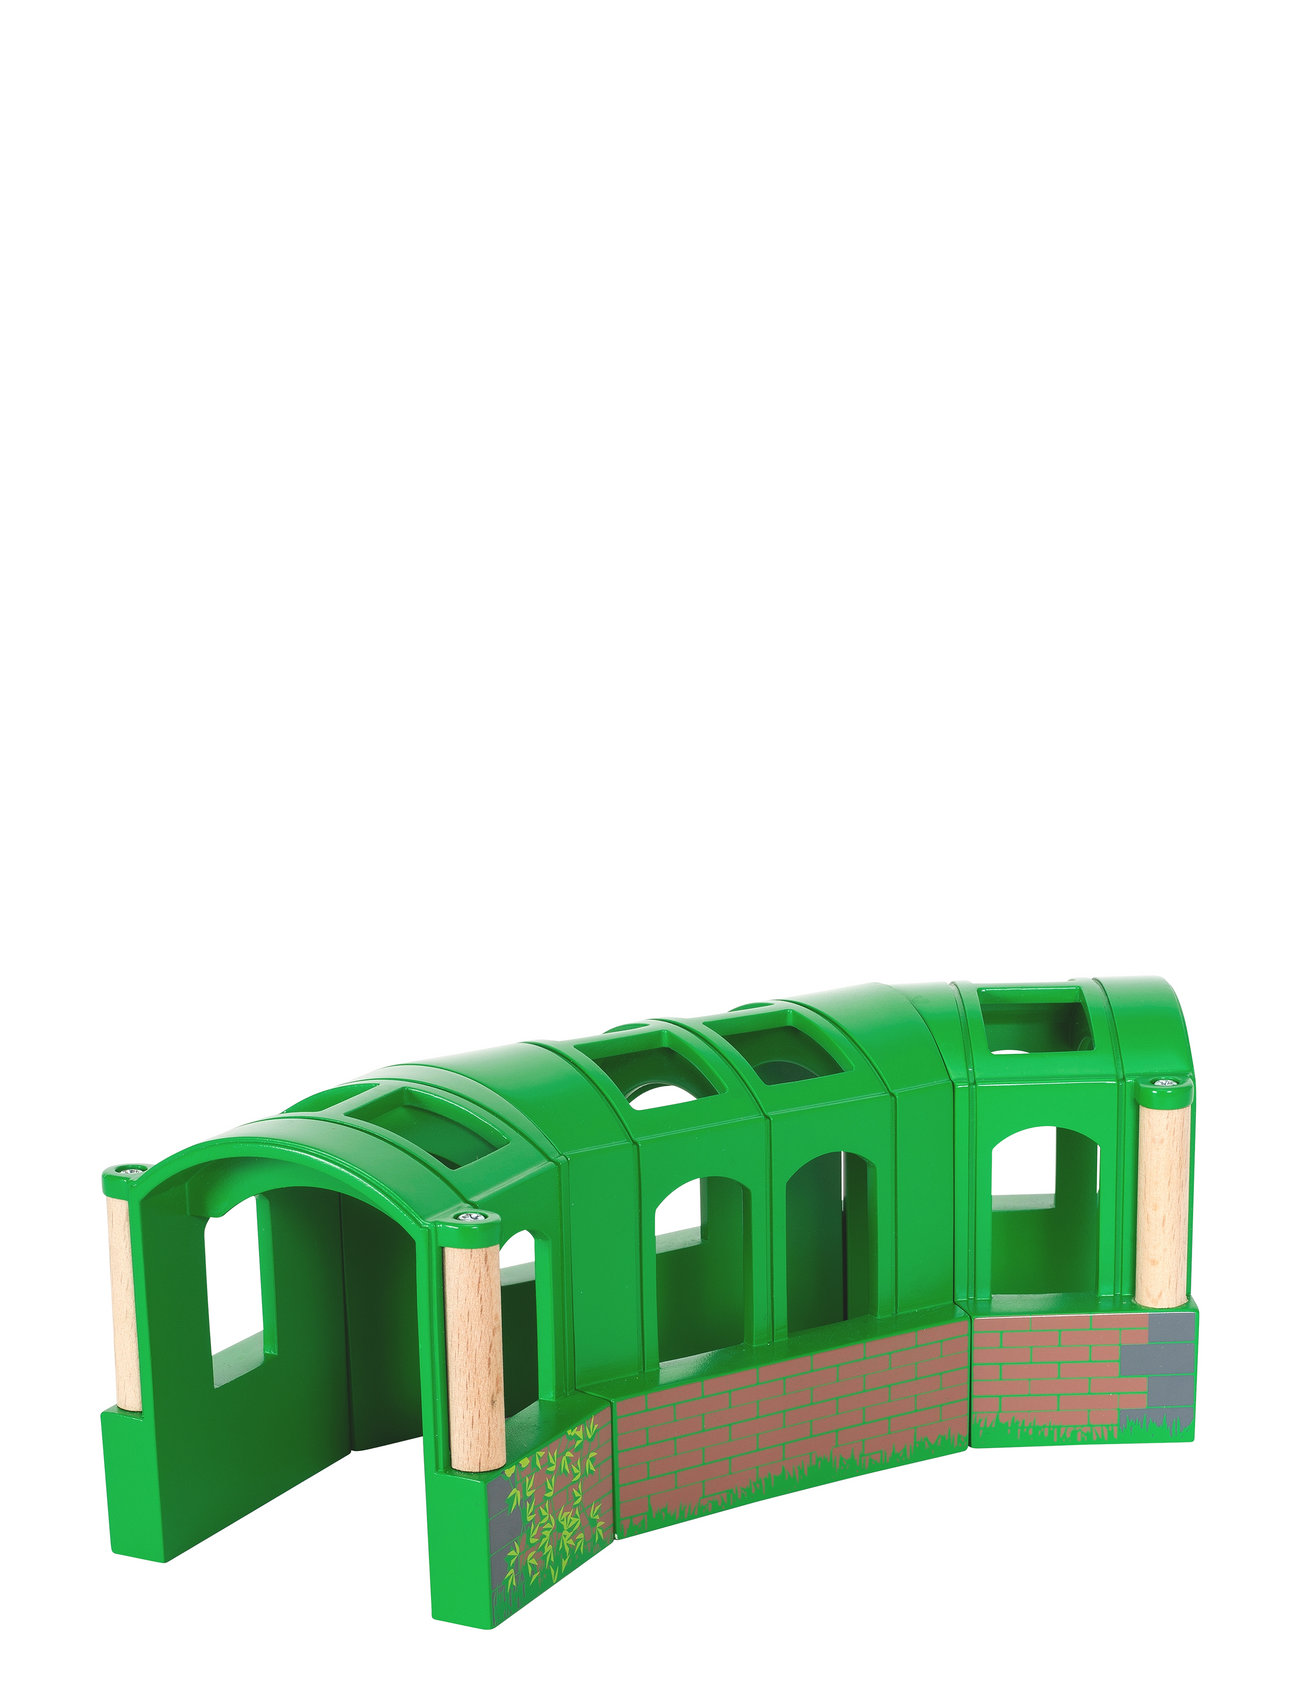 Brio 33709 Fleksibel Tunnel Toys Toy Cars & Vehicles Toy Vehicles Train Accessories Green BRIO